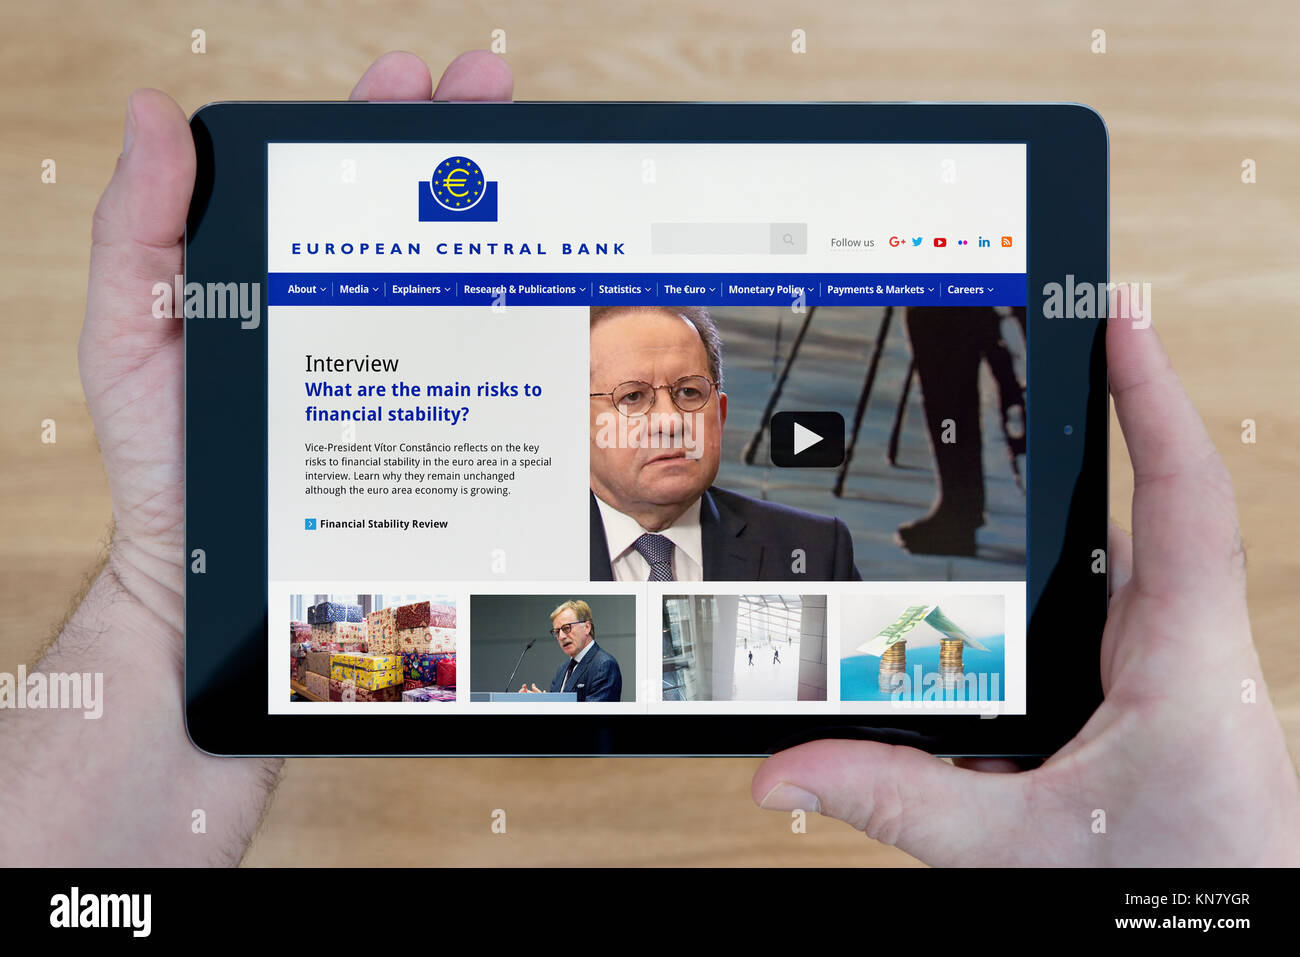 A man looks at the European Central Bank website on his iPad tablet device, shot against a wooden table top background (Editorial use only) Stock Photo